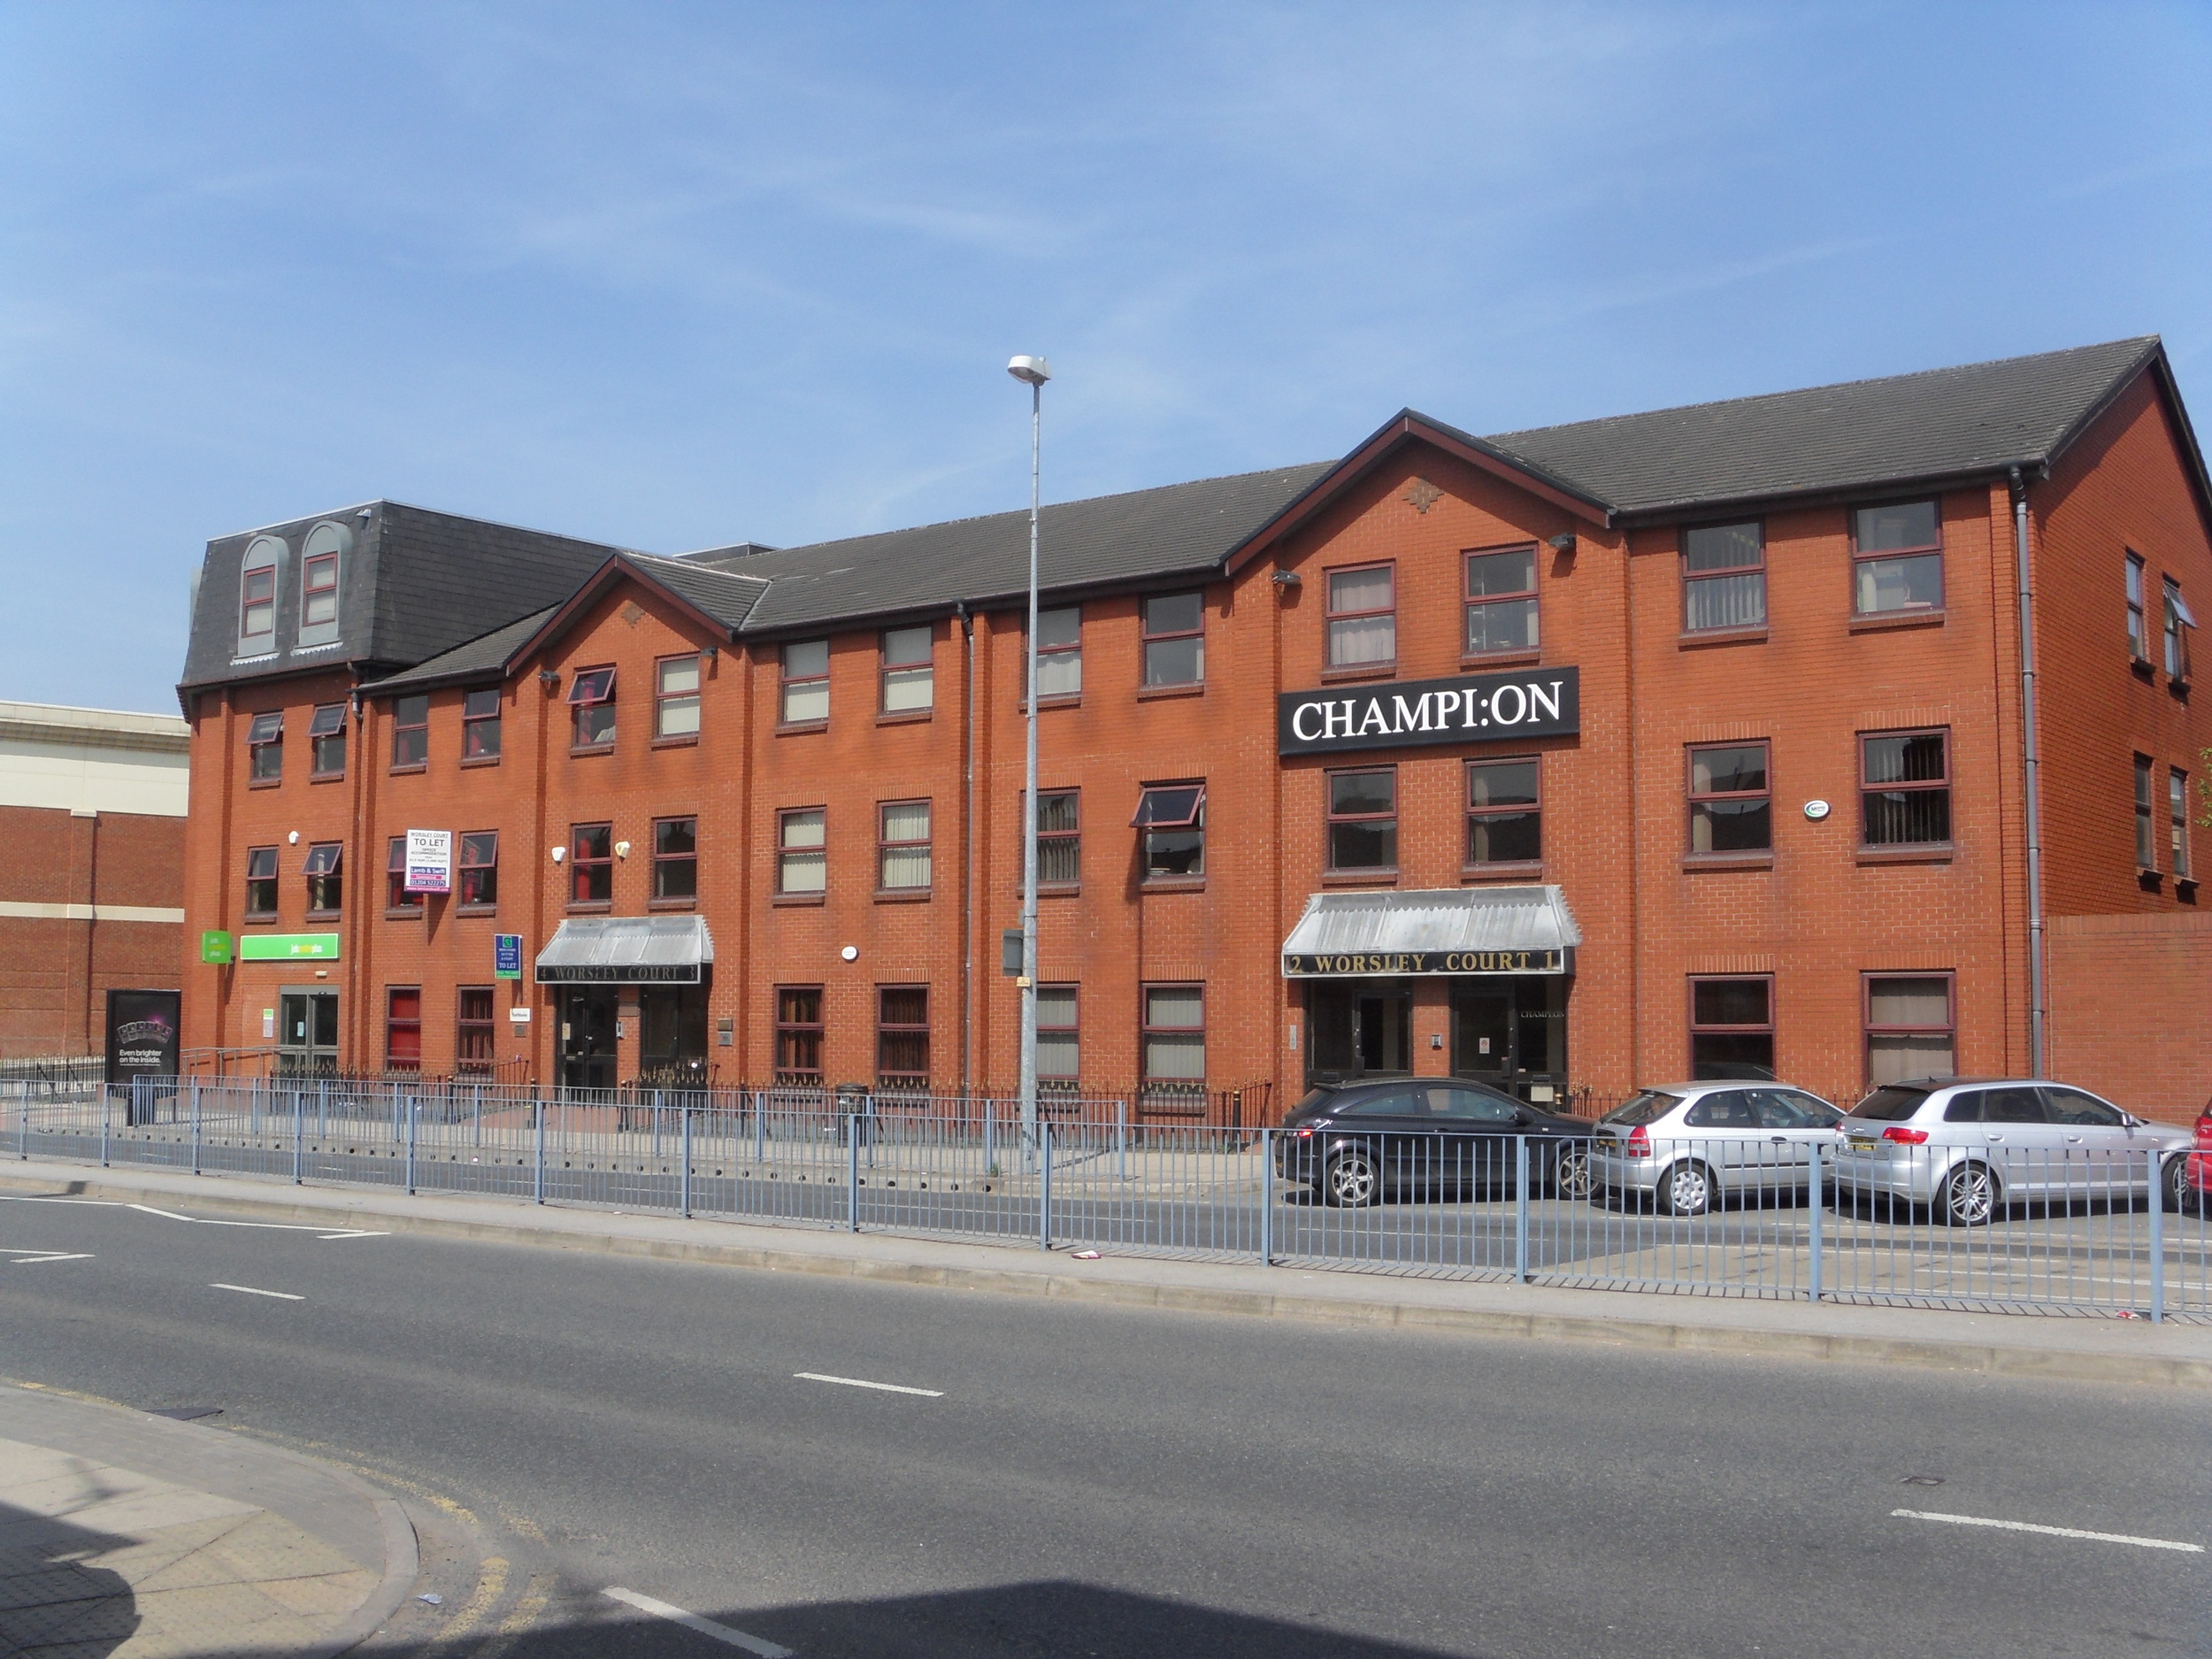   1,000 sq ft Offices To Let   Walkden, Worsley near Manchester 